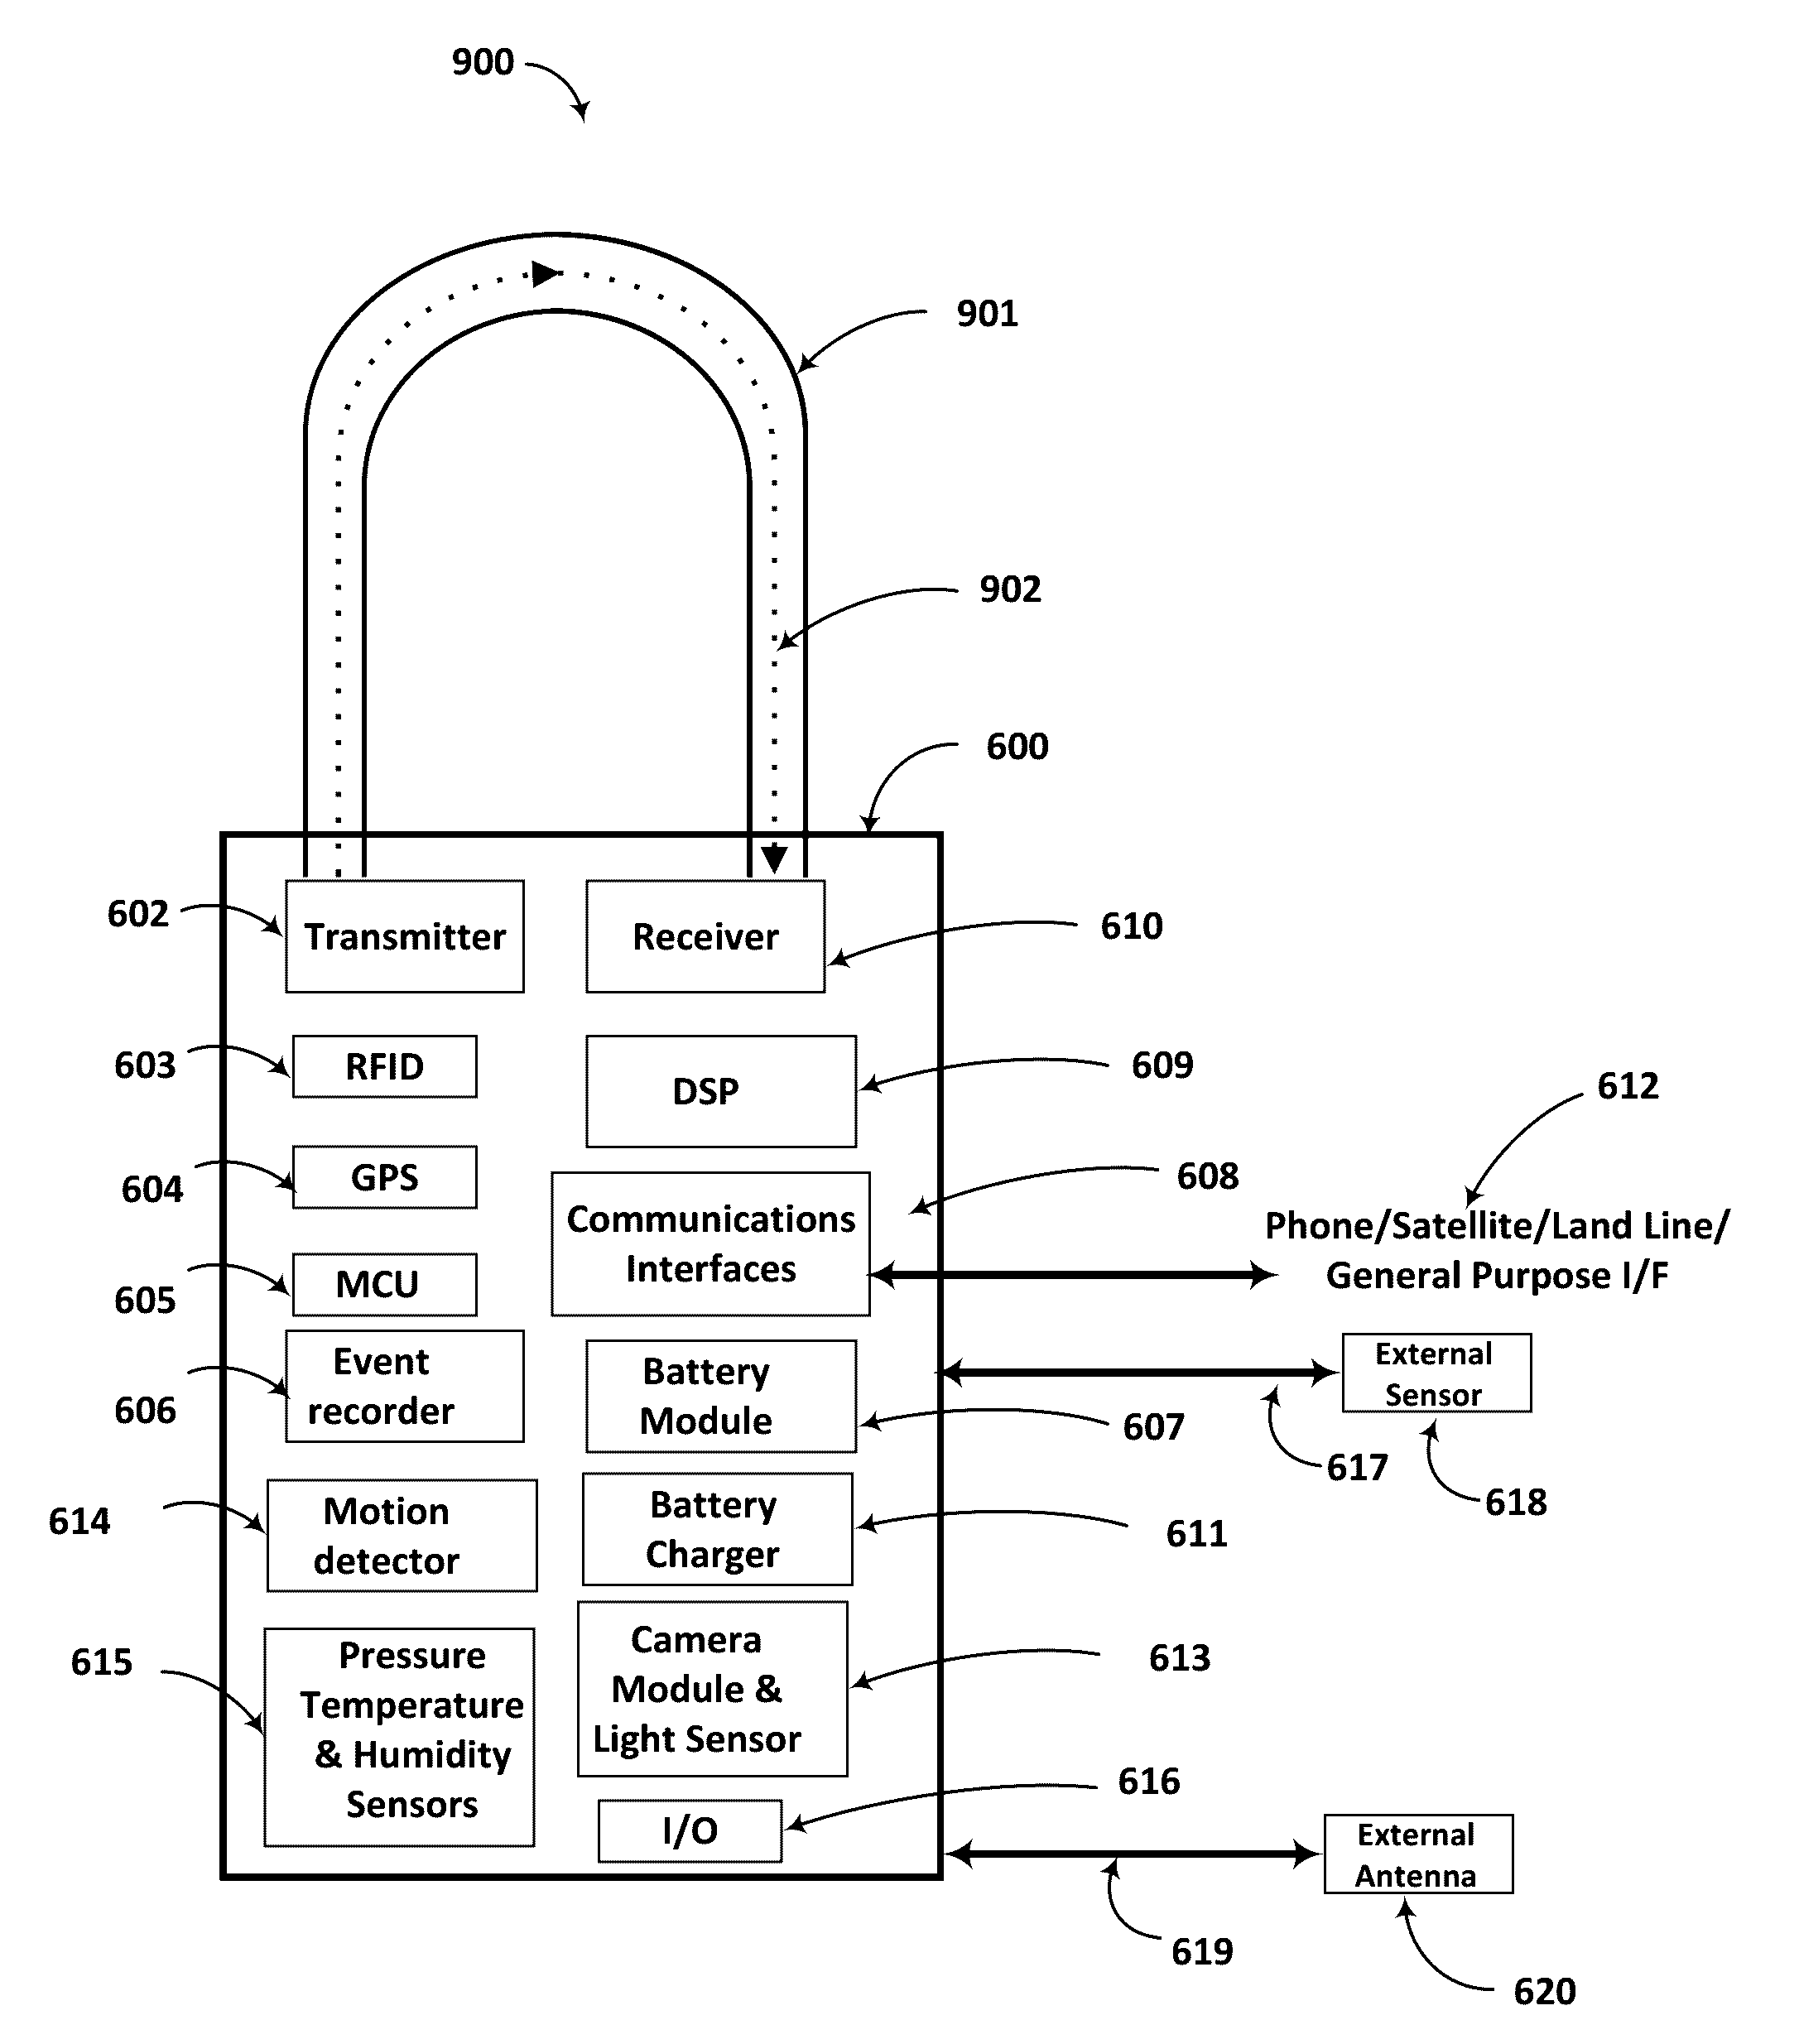 Security system with Anti-tampering sensors and cybersecurity